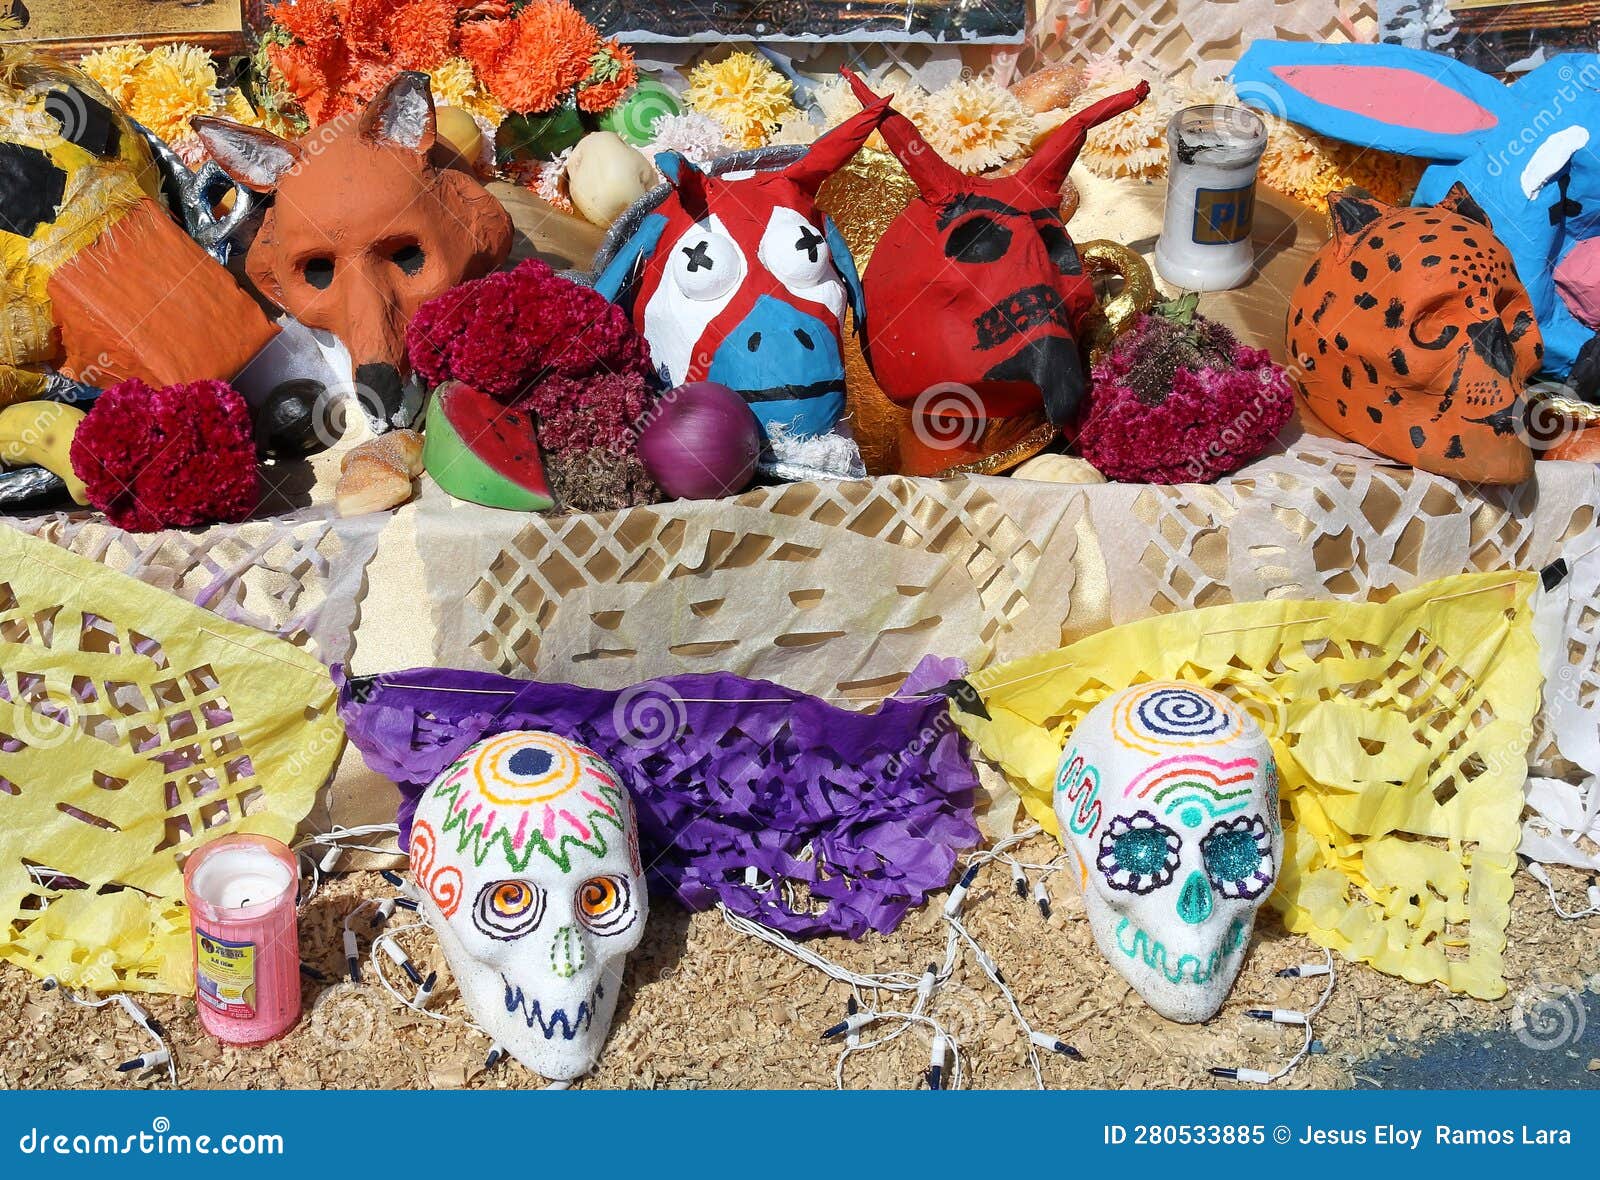 day of the dead celebration at unam in mexico city xi